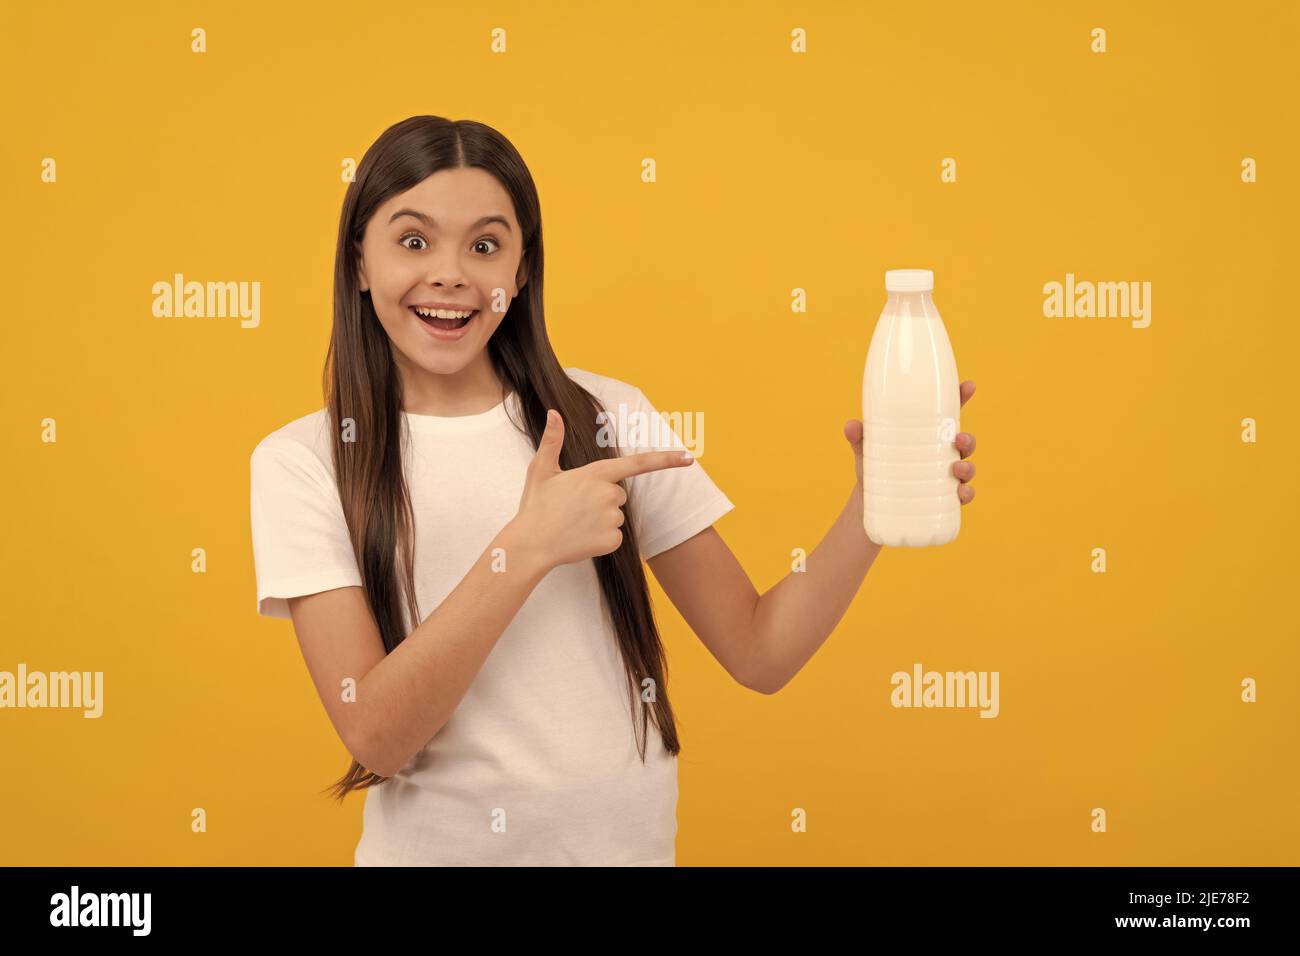 surprised child point finger on dairy beverage product. teen girl going to drink milk. Stock Photo